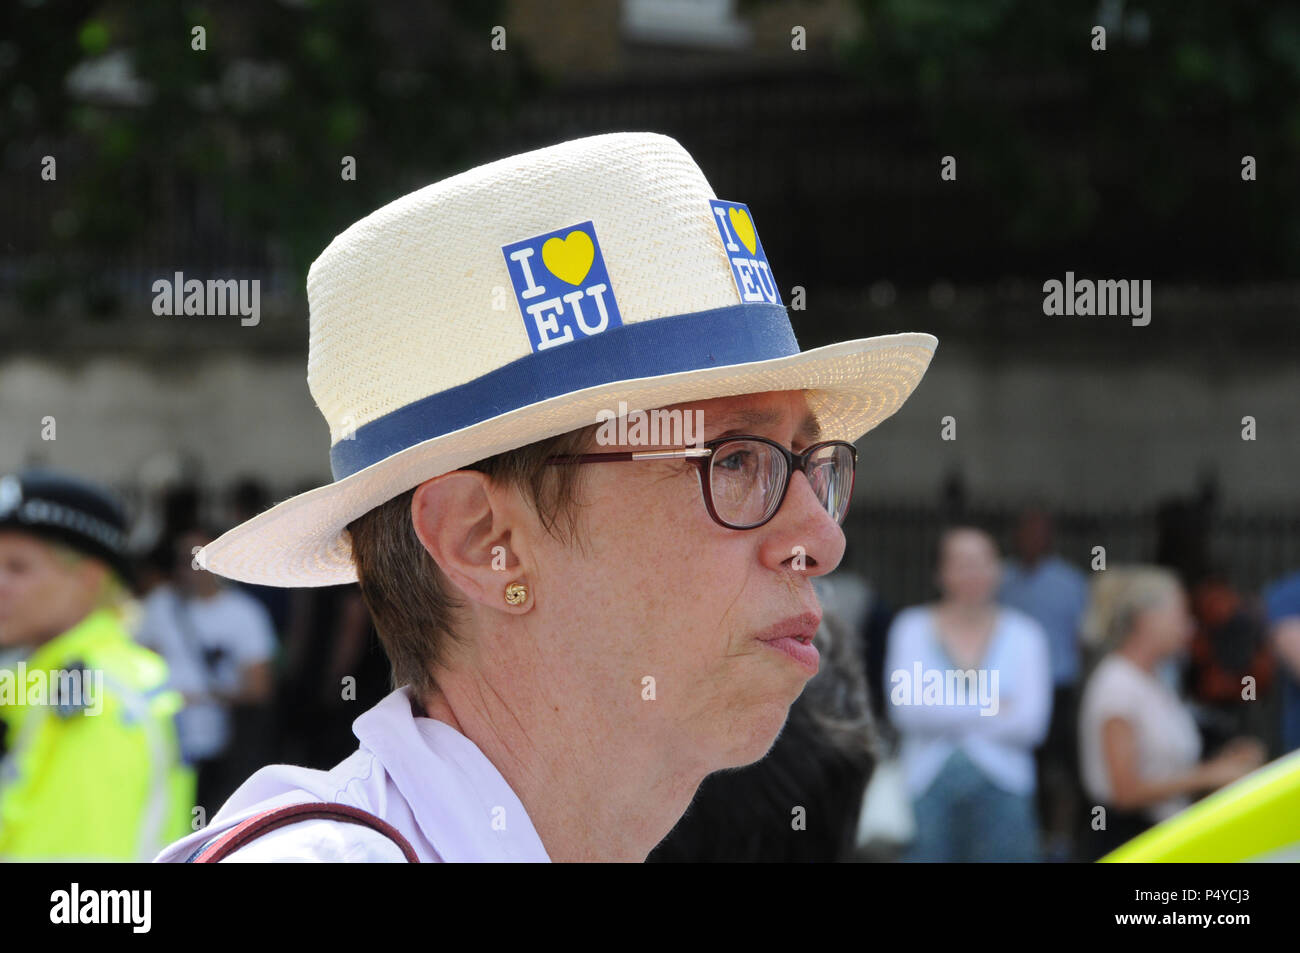 A protester wears a Panama hat, at the People's March for Brexit, London, UK. Stock Photo